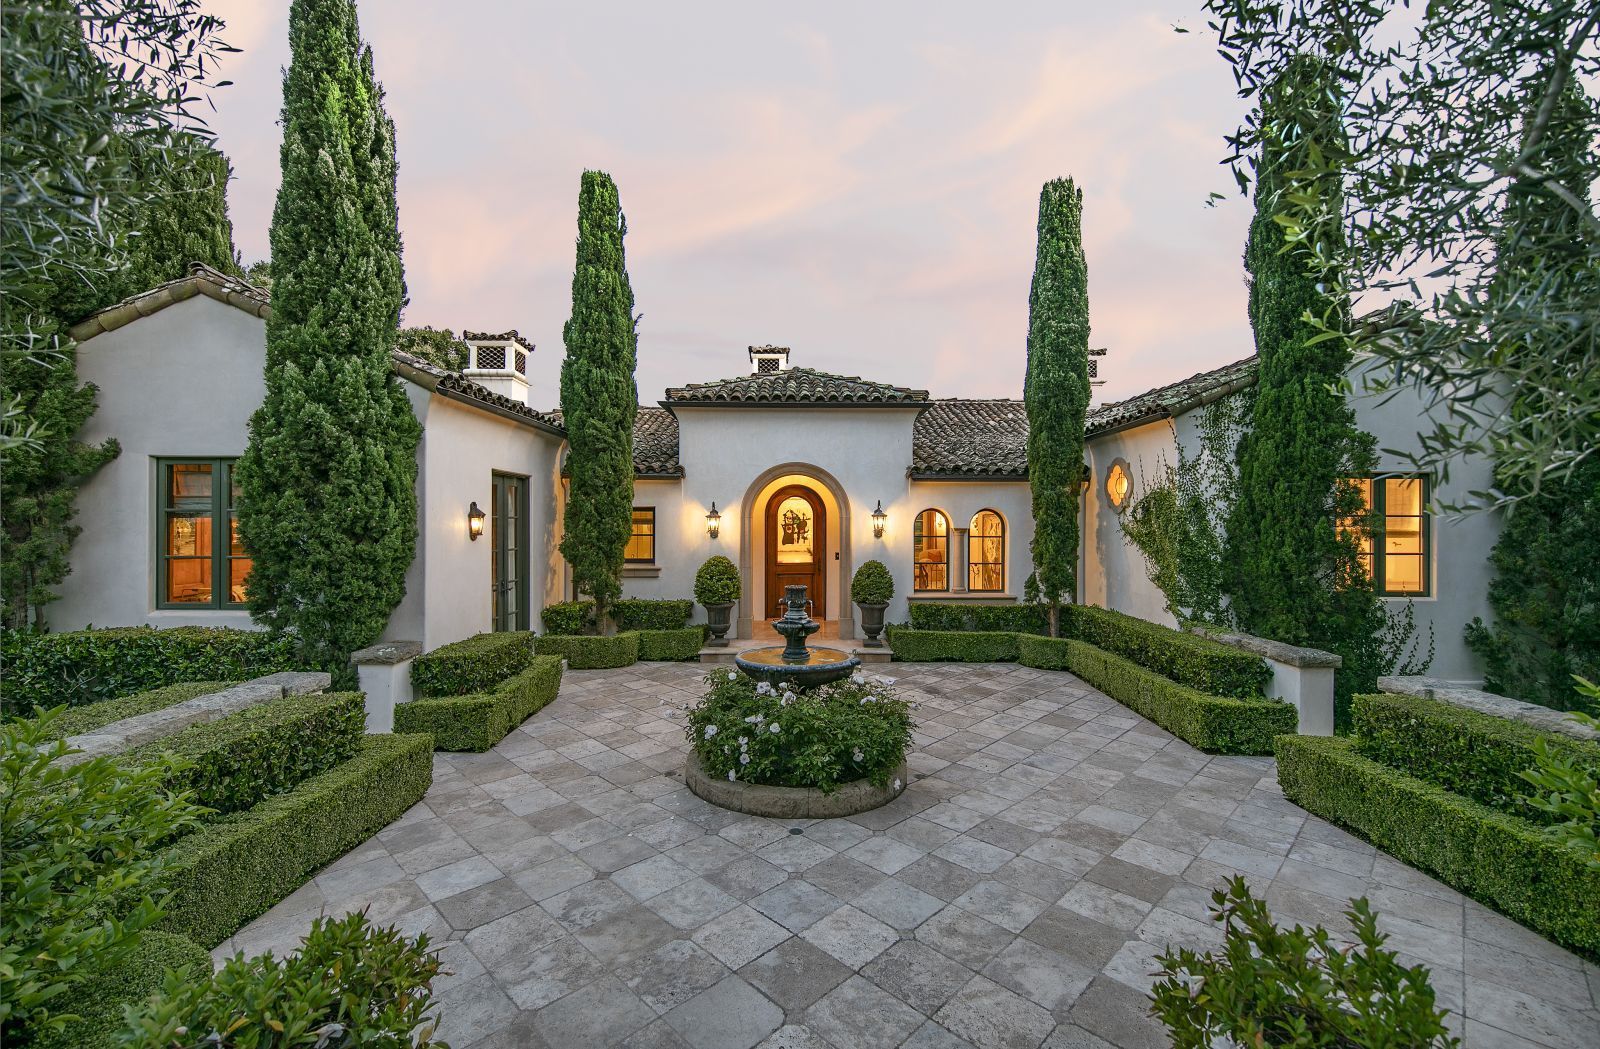 The meticulously manicured entry courtyard of a luxury home, with a border of privet hedges and Italian cypress trees. The home's facade has white walls and an arched front door, and is illuminated from within.